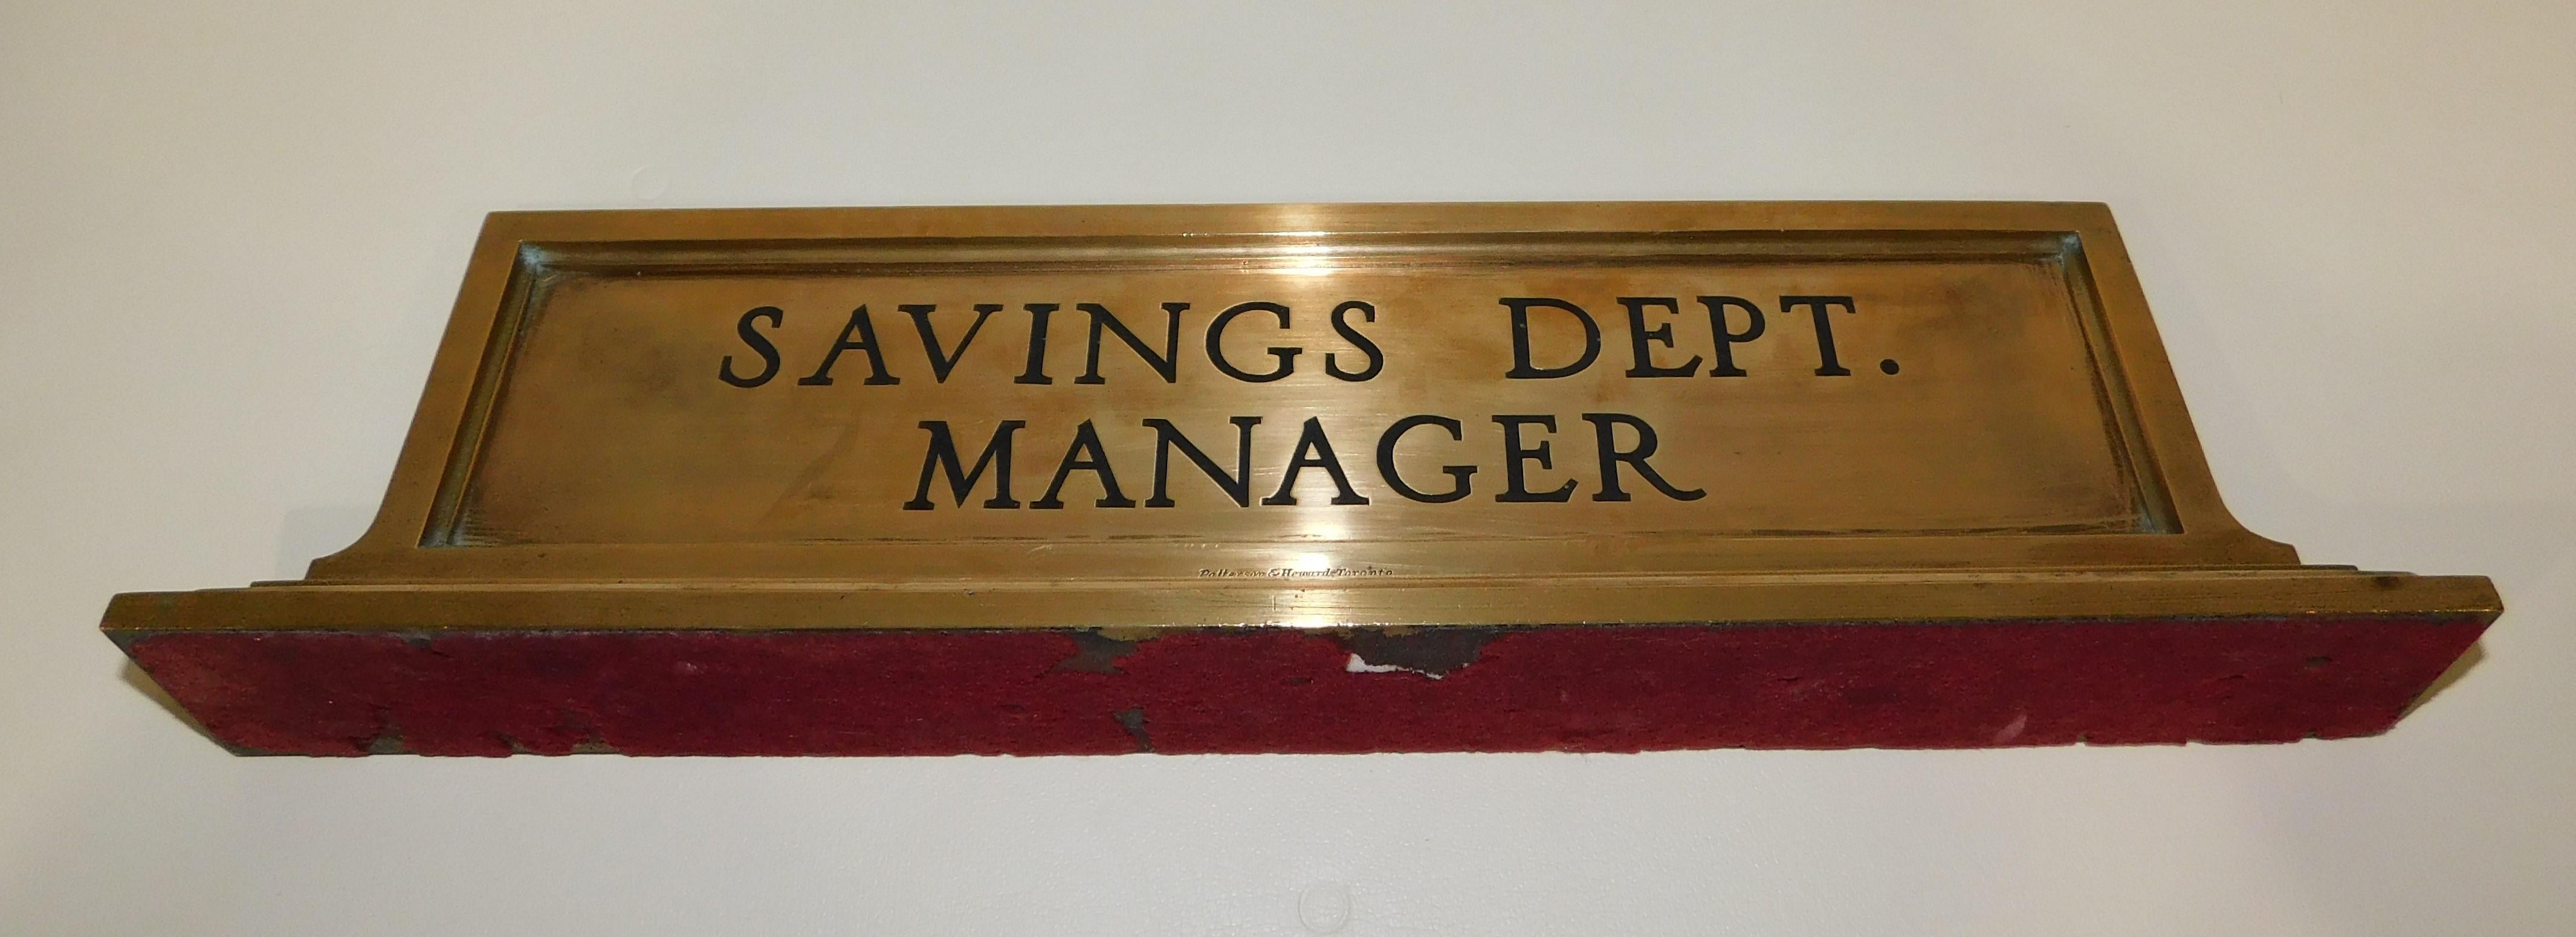 Vintage Heavy Bronze Savings Department Manager Desk Name Plate Sign, circa 1925 In Good Condition For Sale In Hamilton, Ontario